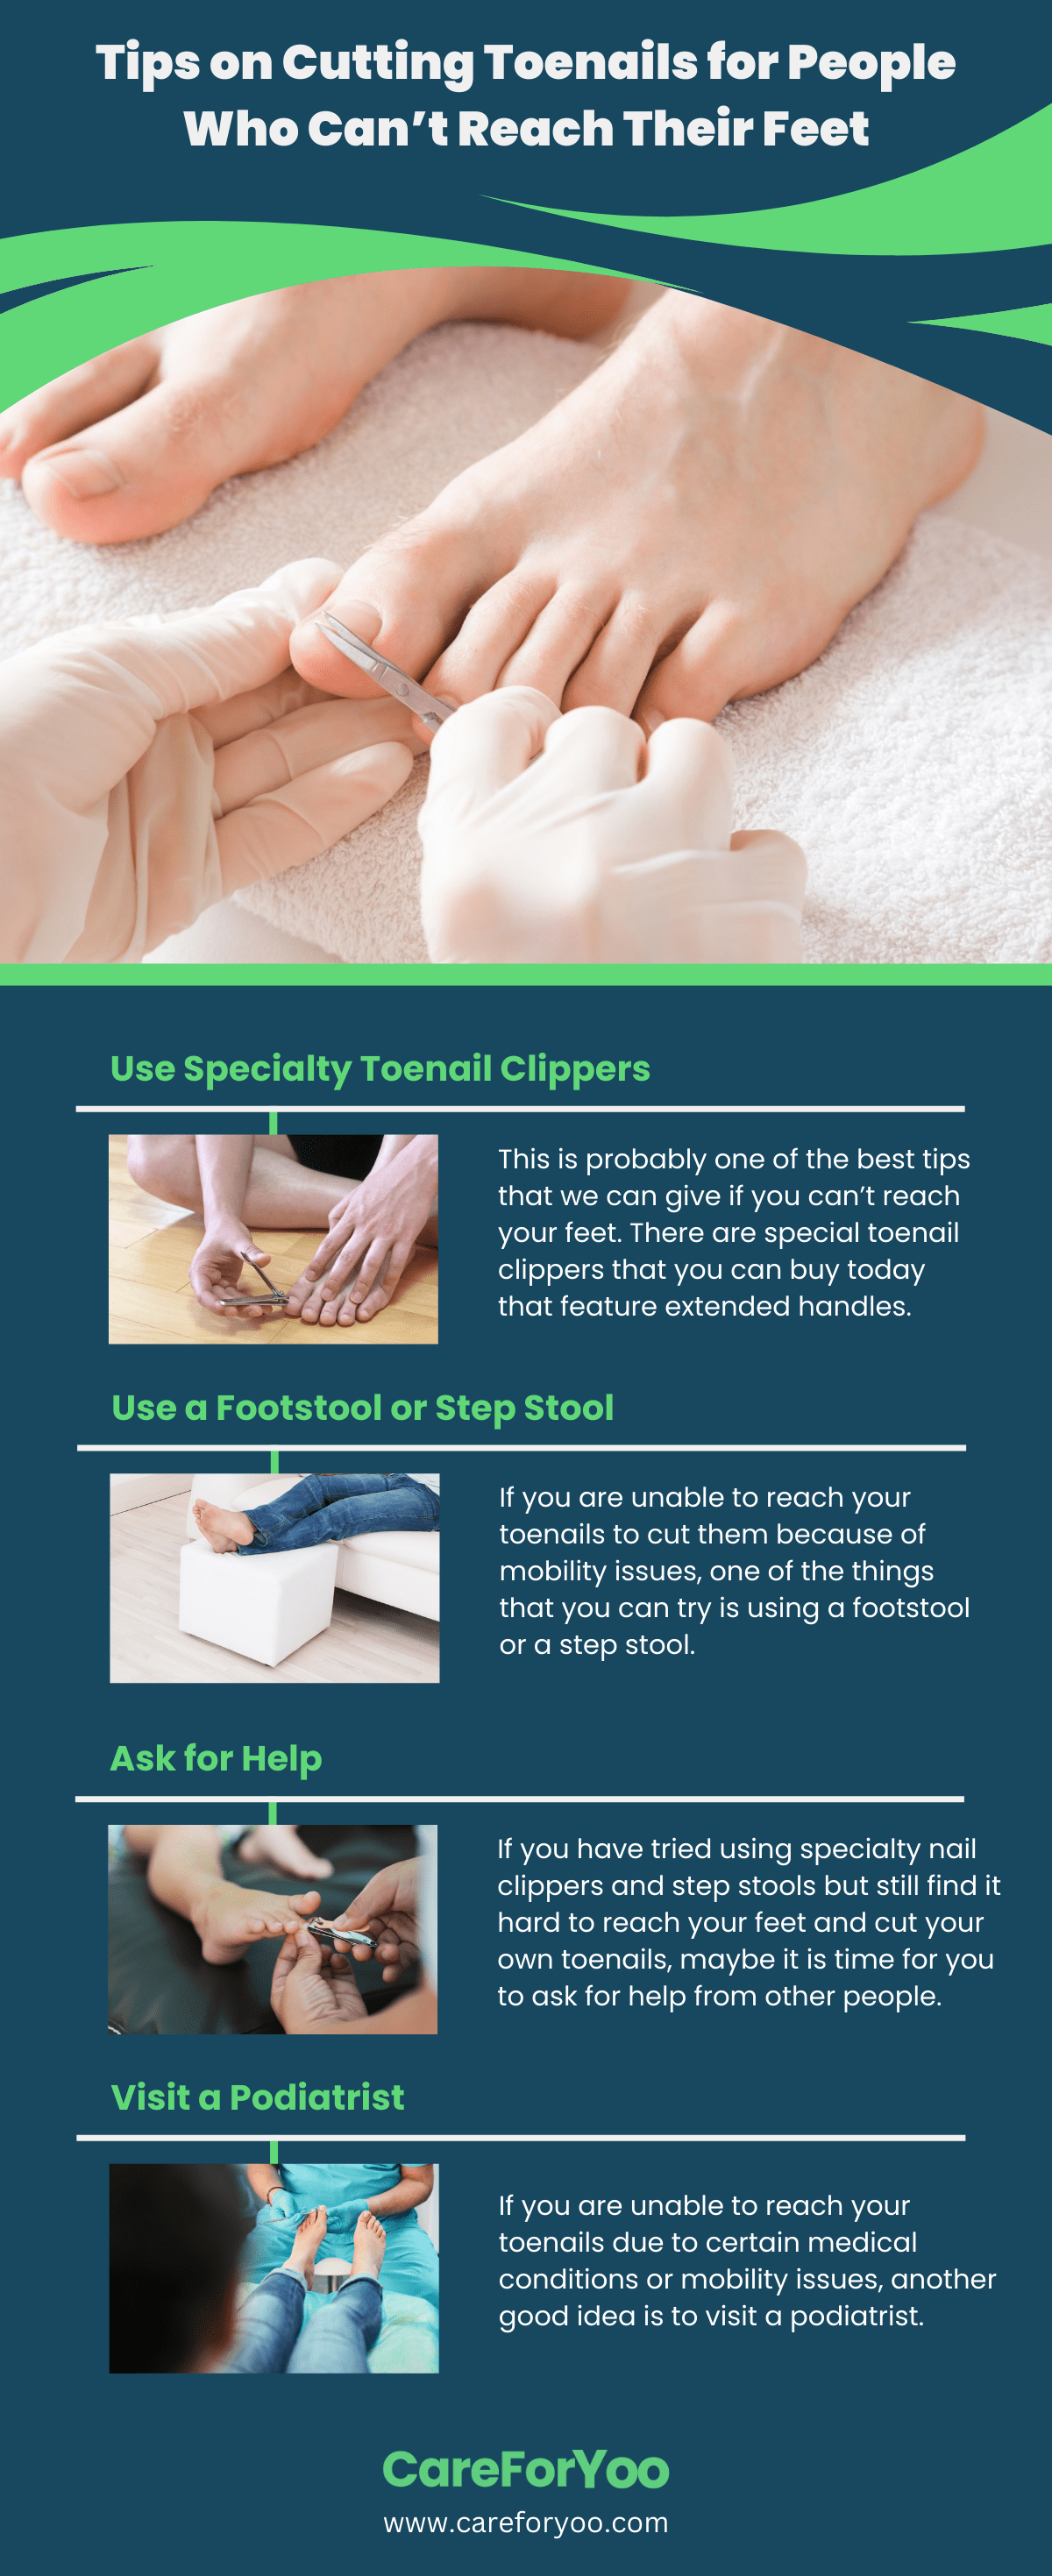 Tips on Cutting Toenails for People Who Can’t Reach Their Feet